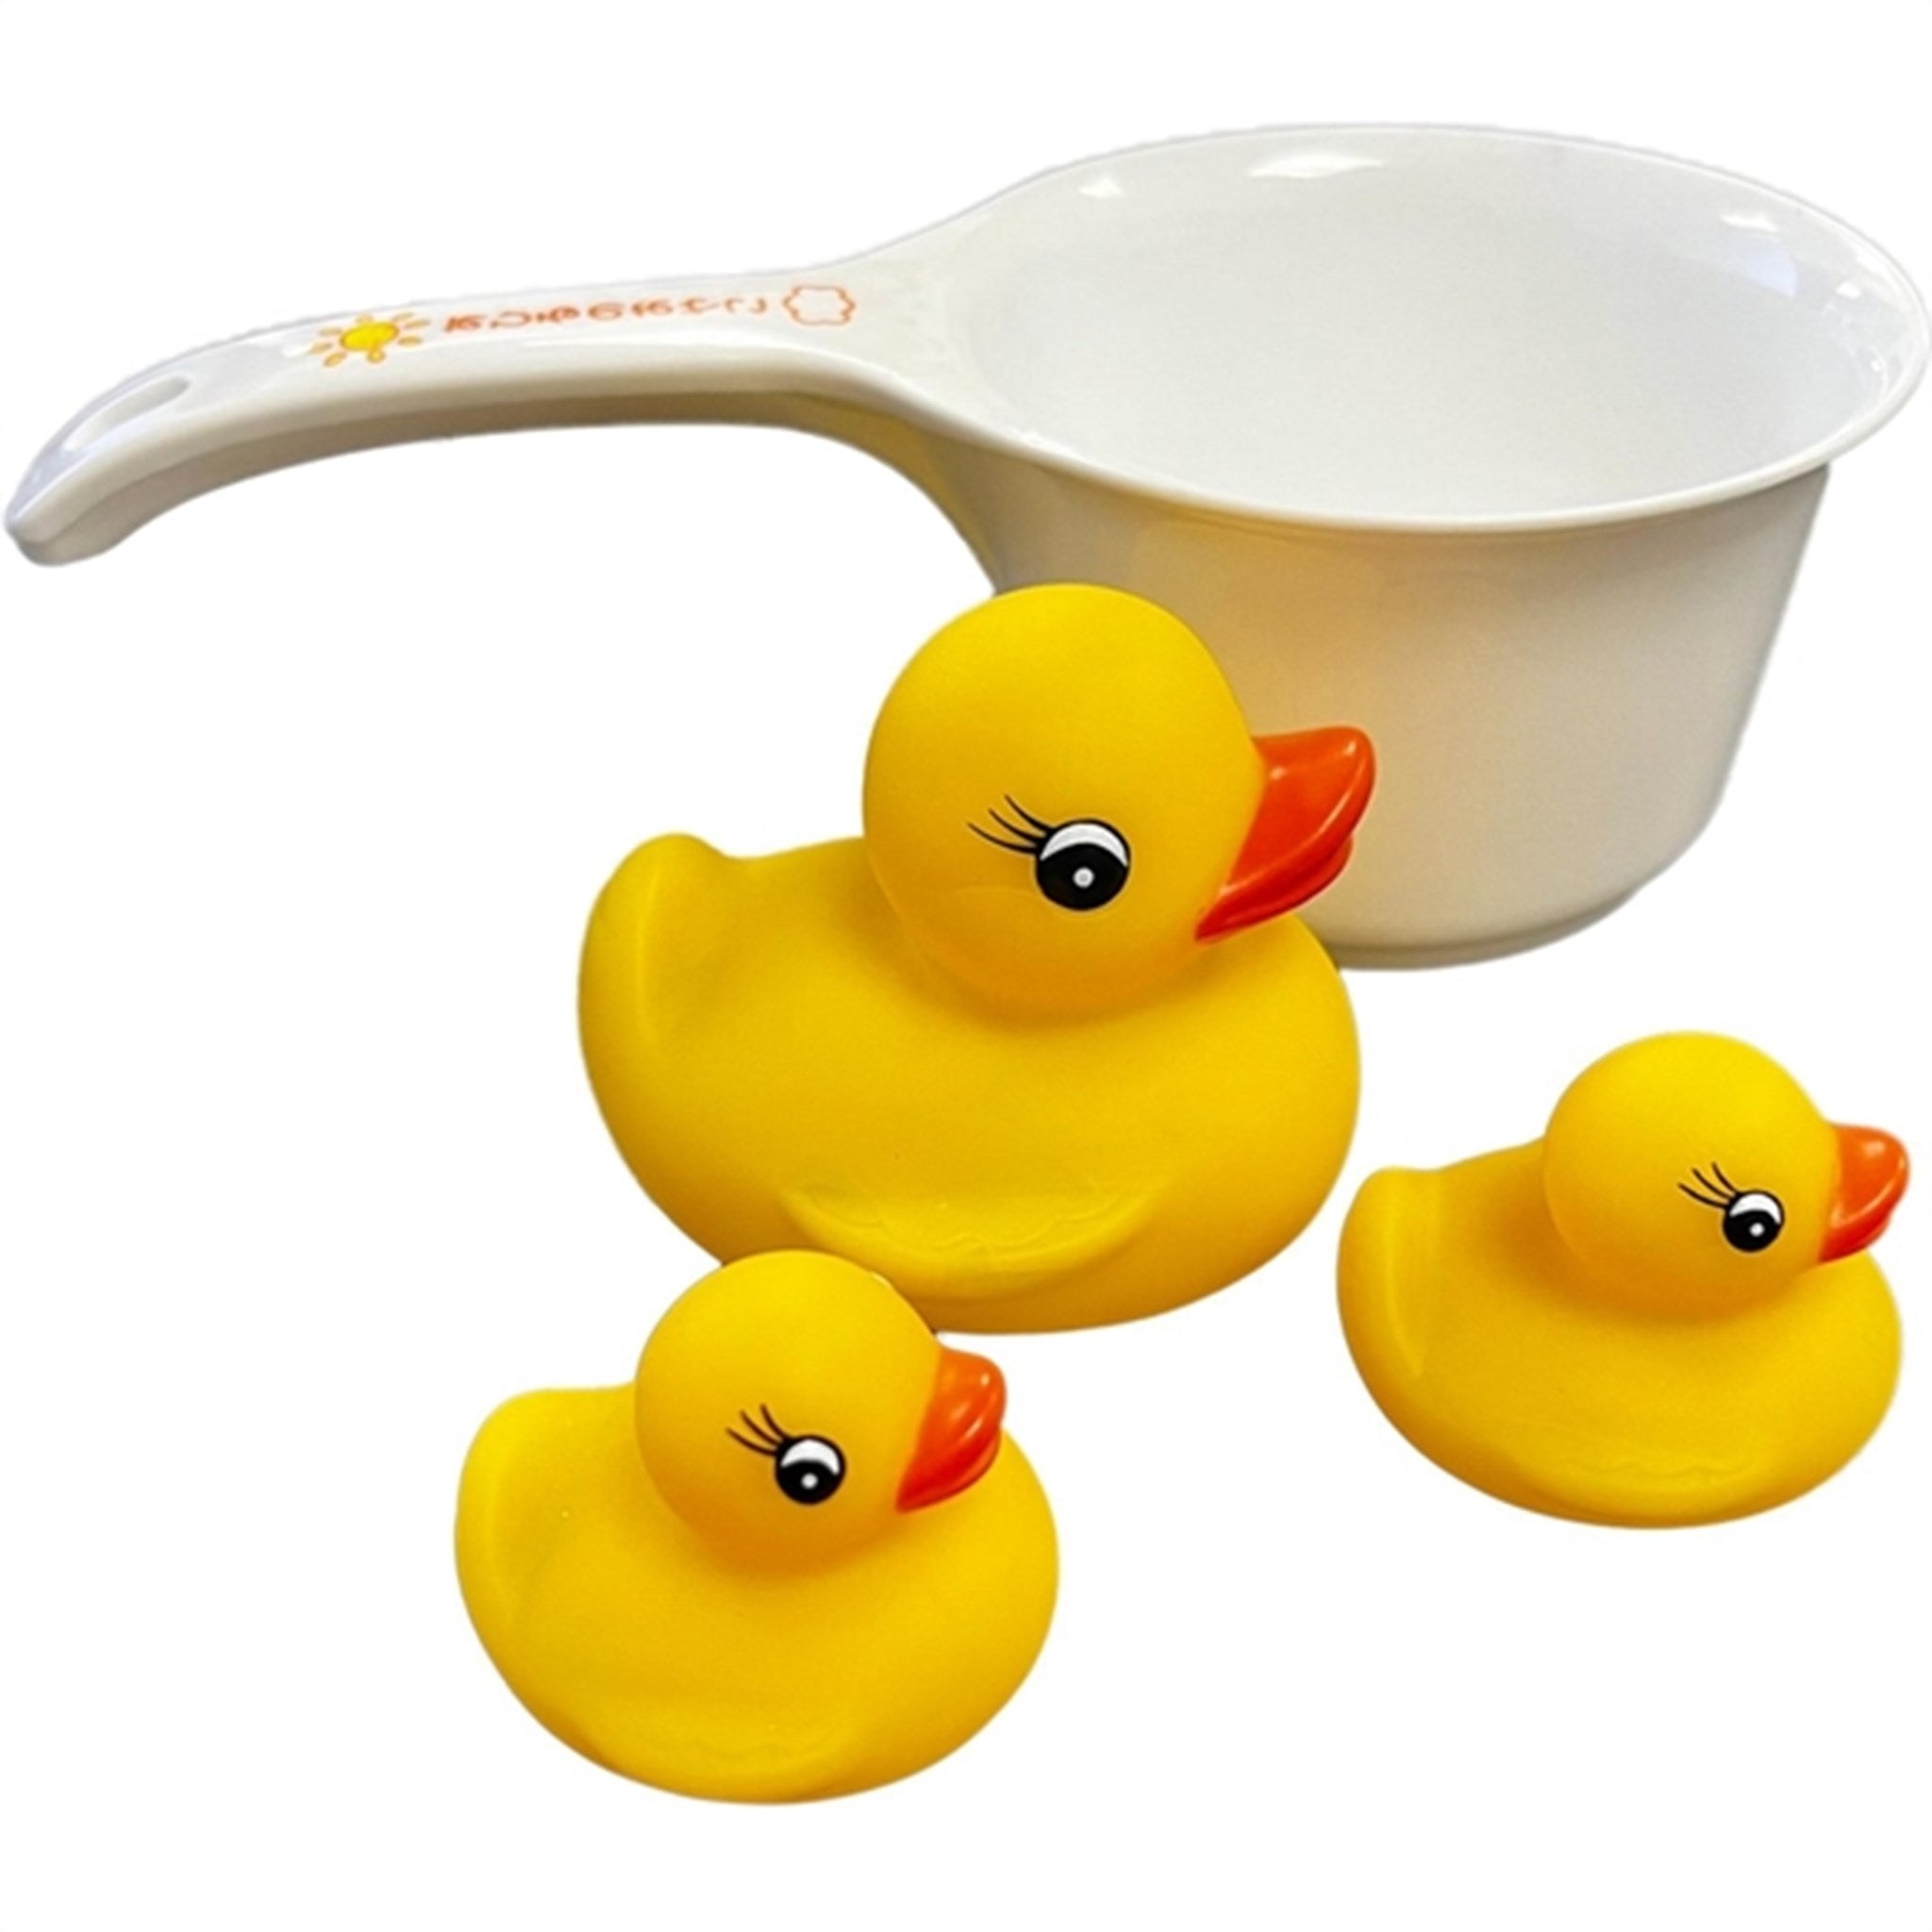 Magni Bath Duck Family Including Cup Yellow/White - Size Default Title